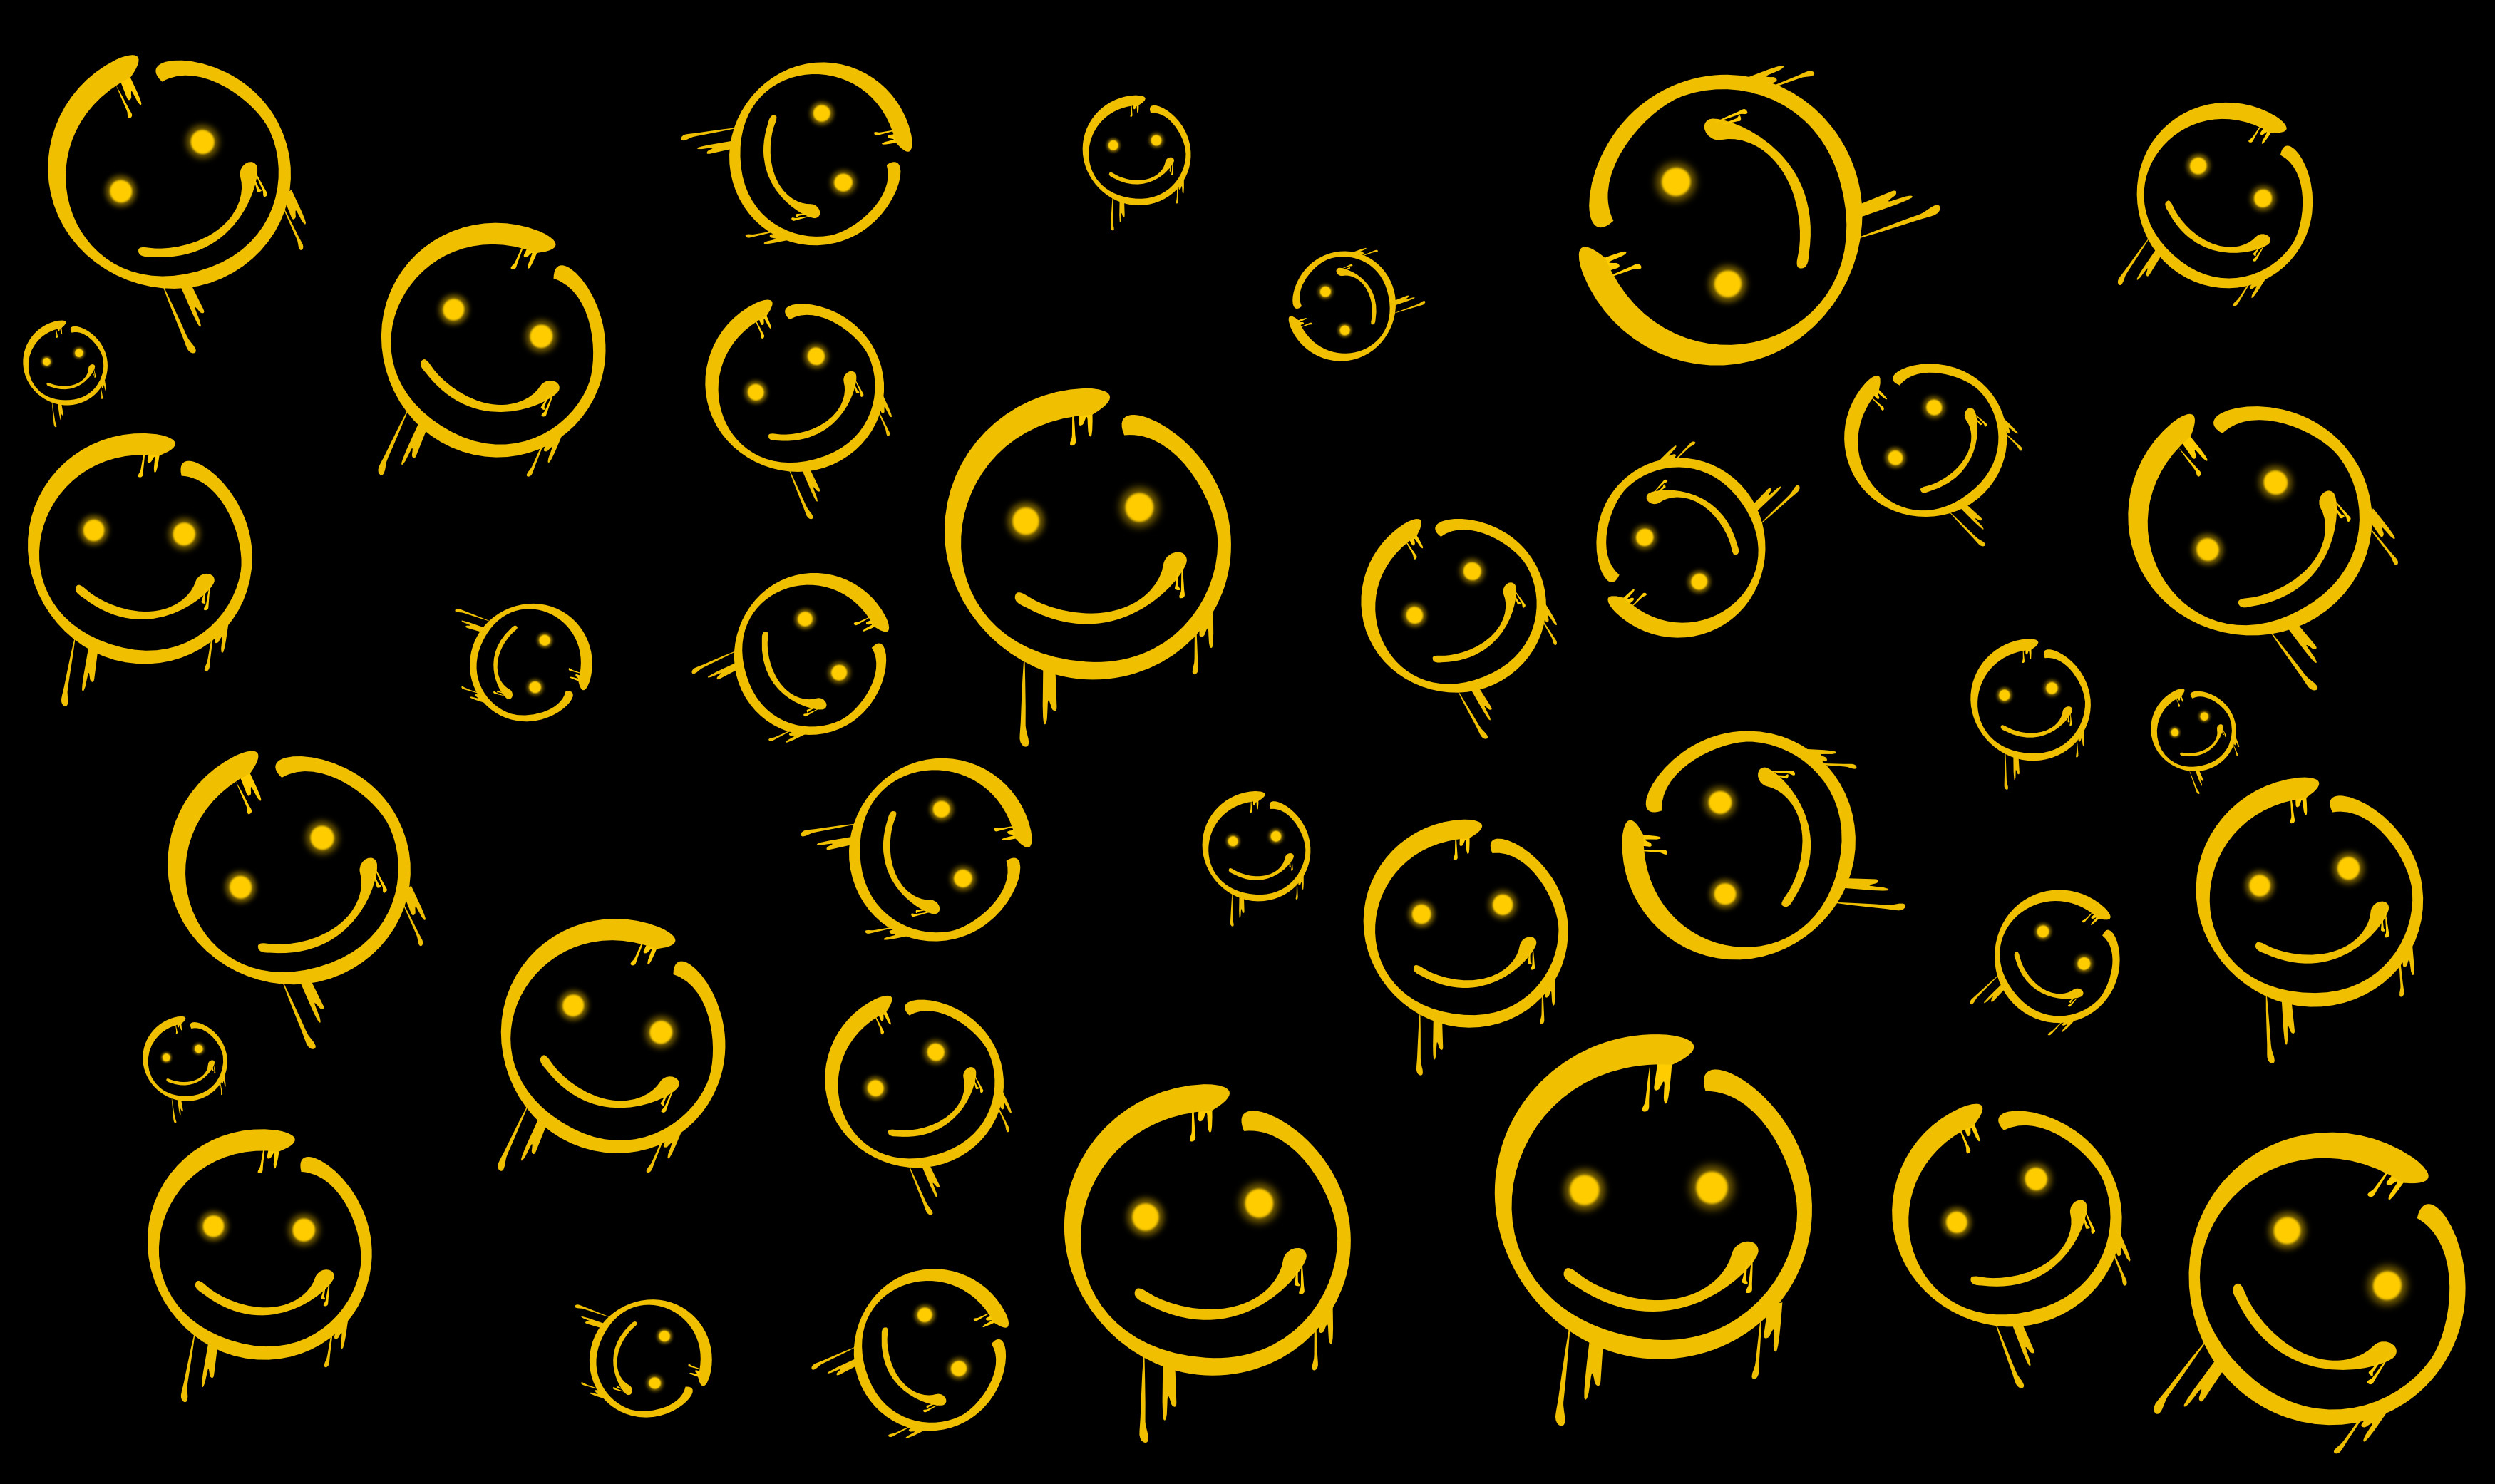 Mx74 Bored Adorable Desktop Wallpapers For Free Trippy Smiley Face Background 3500x Wallpaper Teahub Io